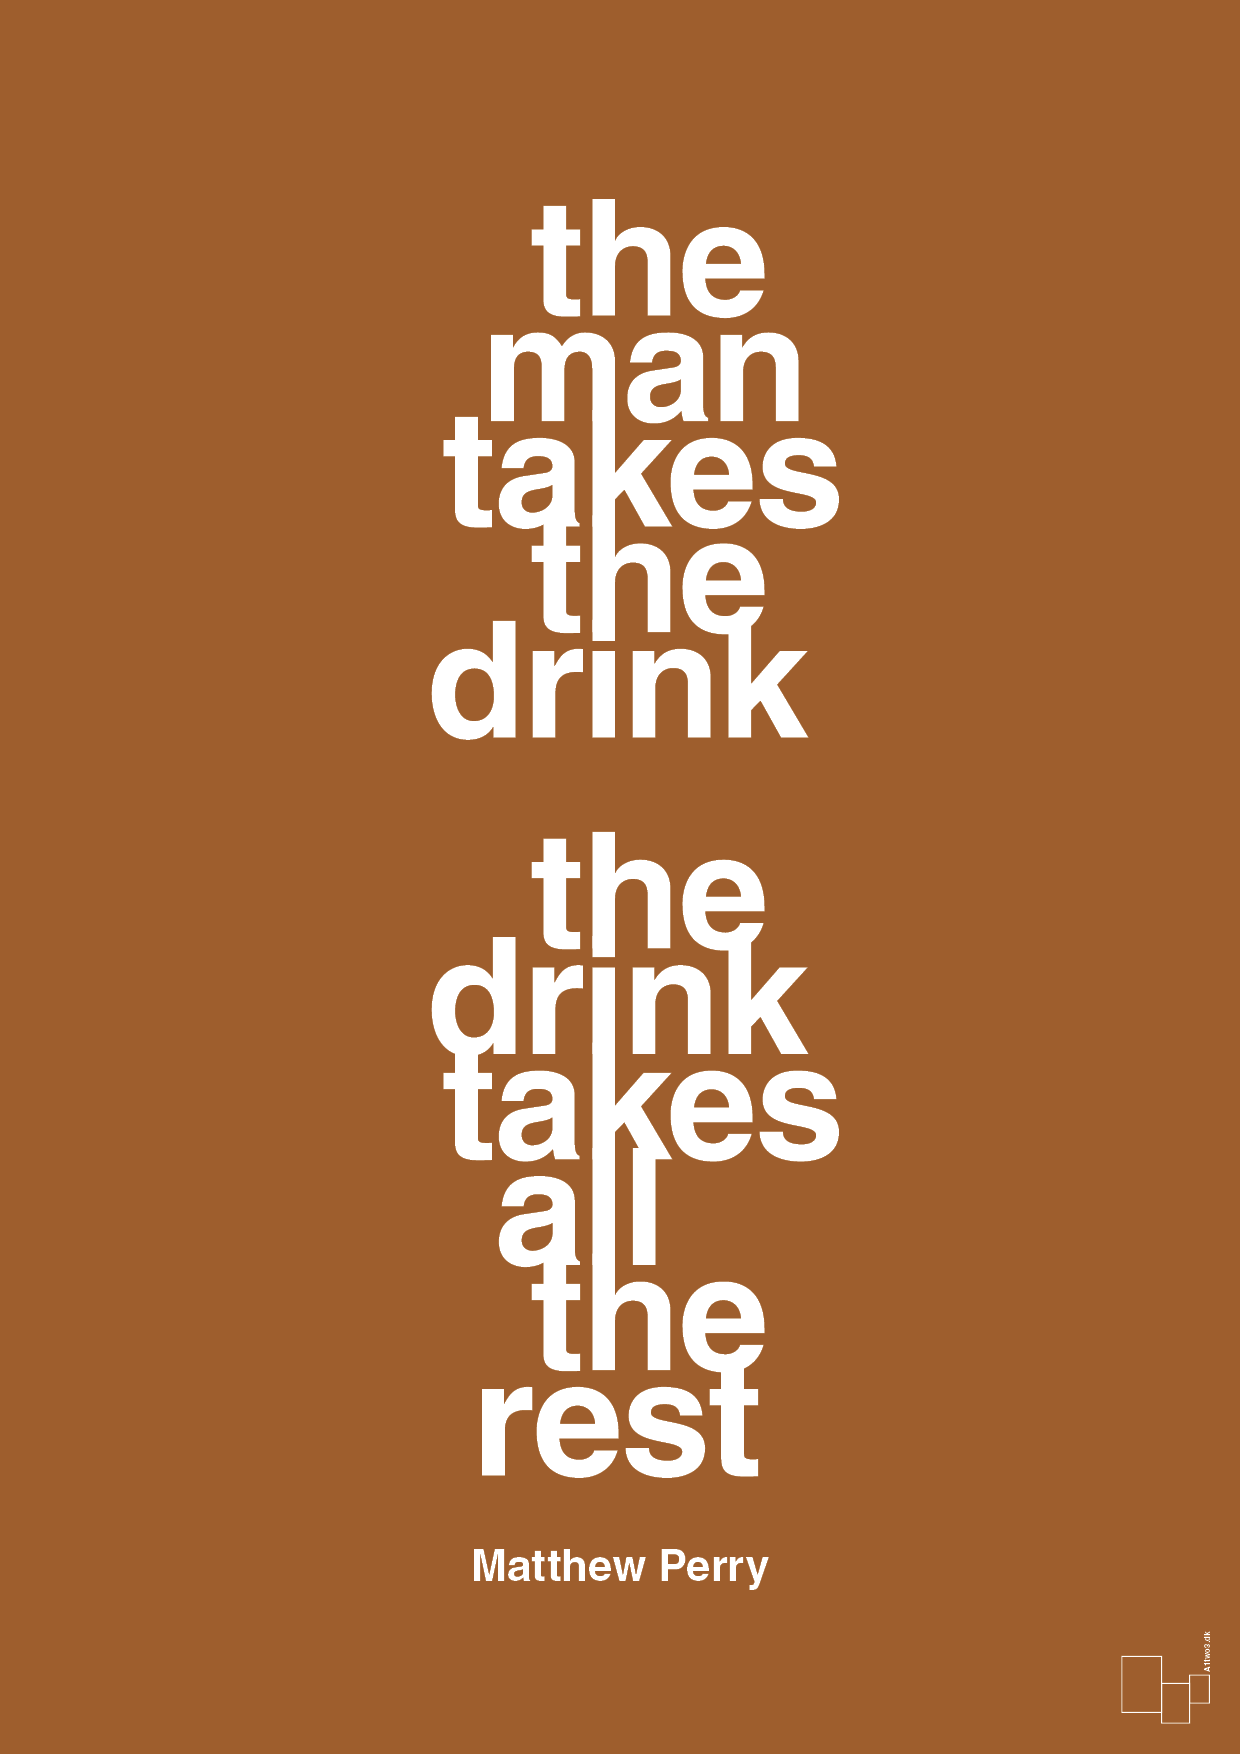 the man takes the drink the drink takes all the rest - Plakat med Citater i Cognac